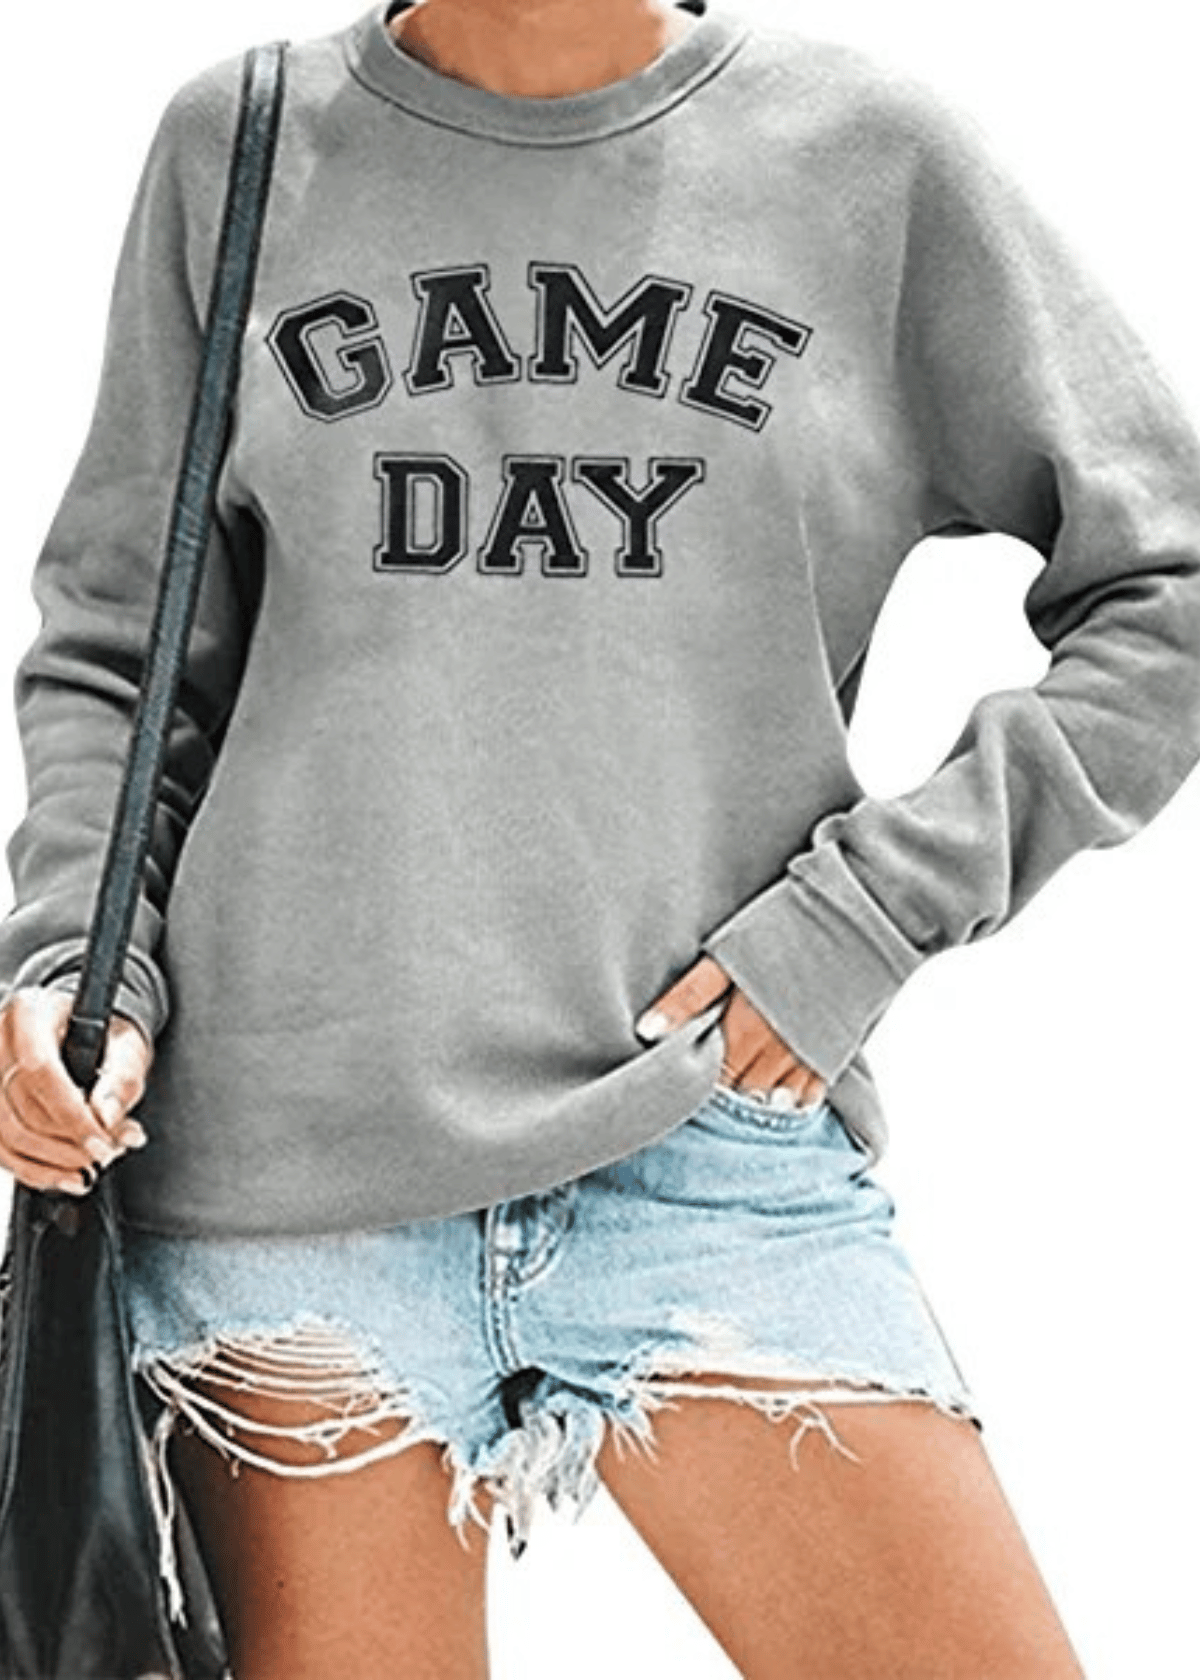 Fun, Stylish Soccer Mom Outfit Ideas: What to Wear on Game Day!